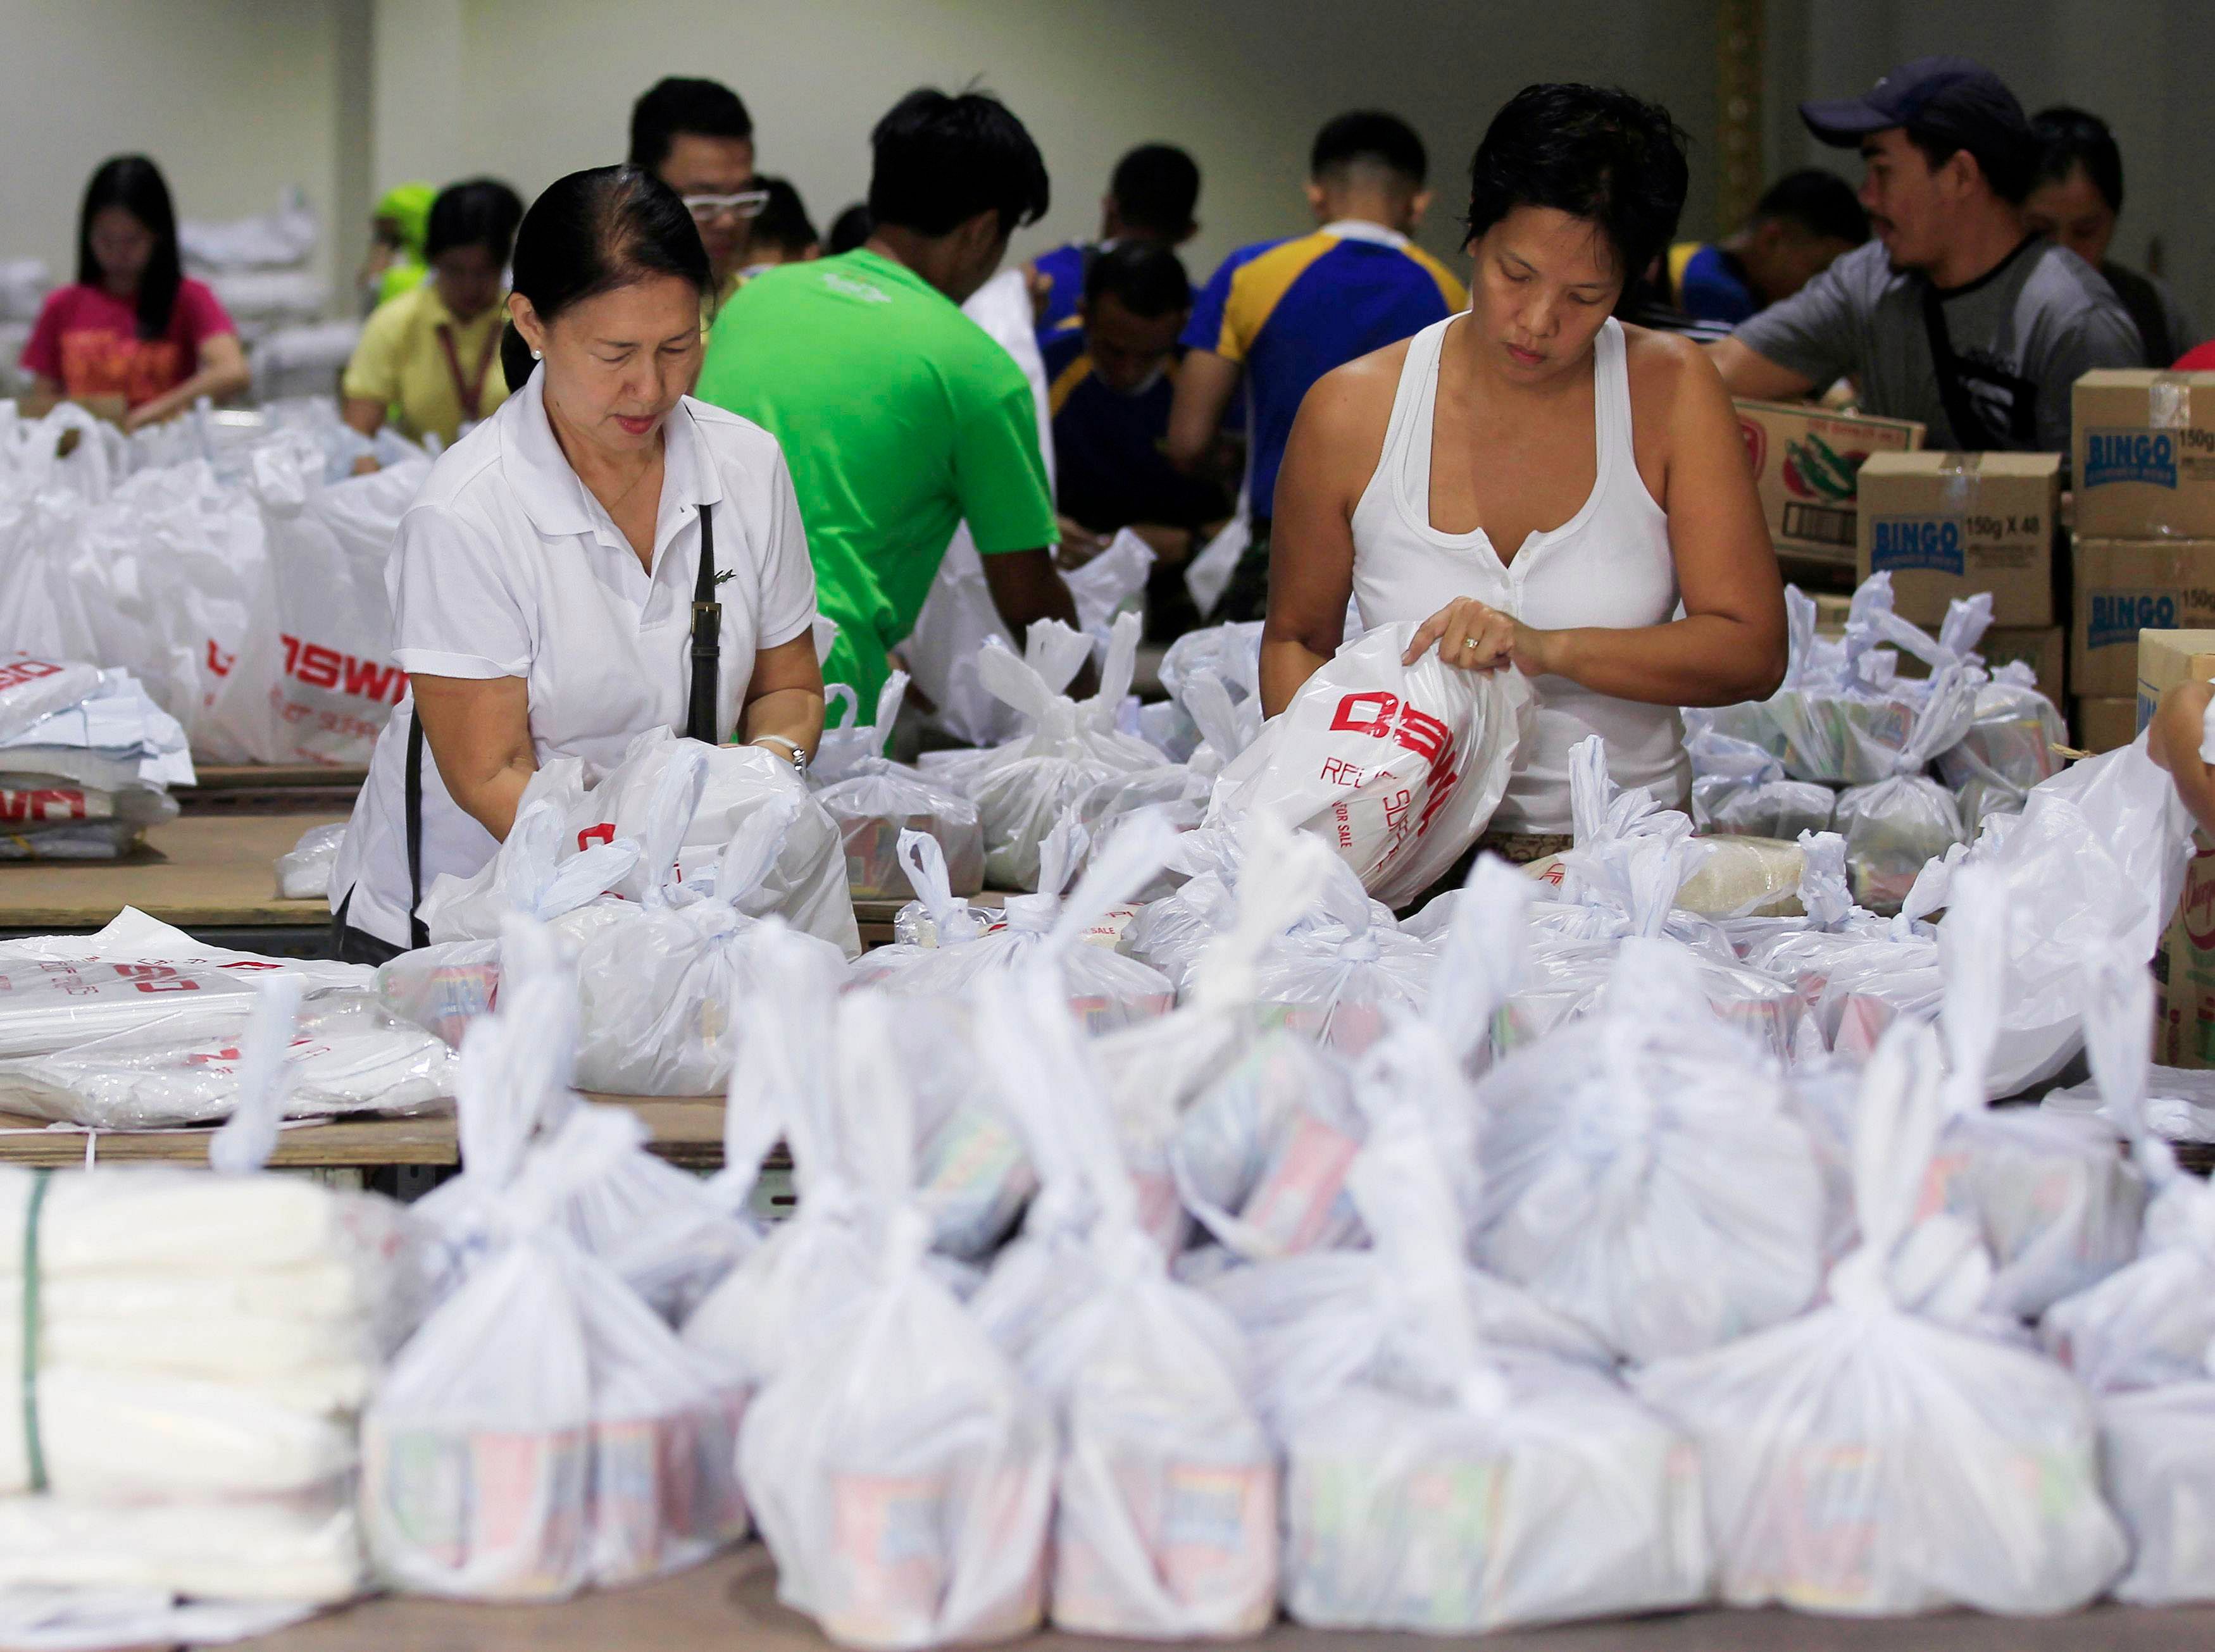 Volunteers prepare relief goods, to be delivered before Typhoon Hagupit makes landfall, inside a Department of Social Welfare and Development (DSWD) warehouse in Manila, December 6, 2014. Photo: Reuters